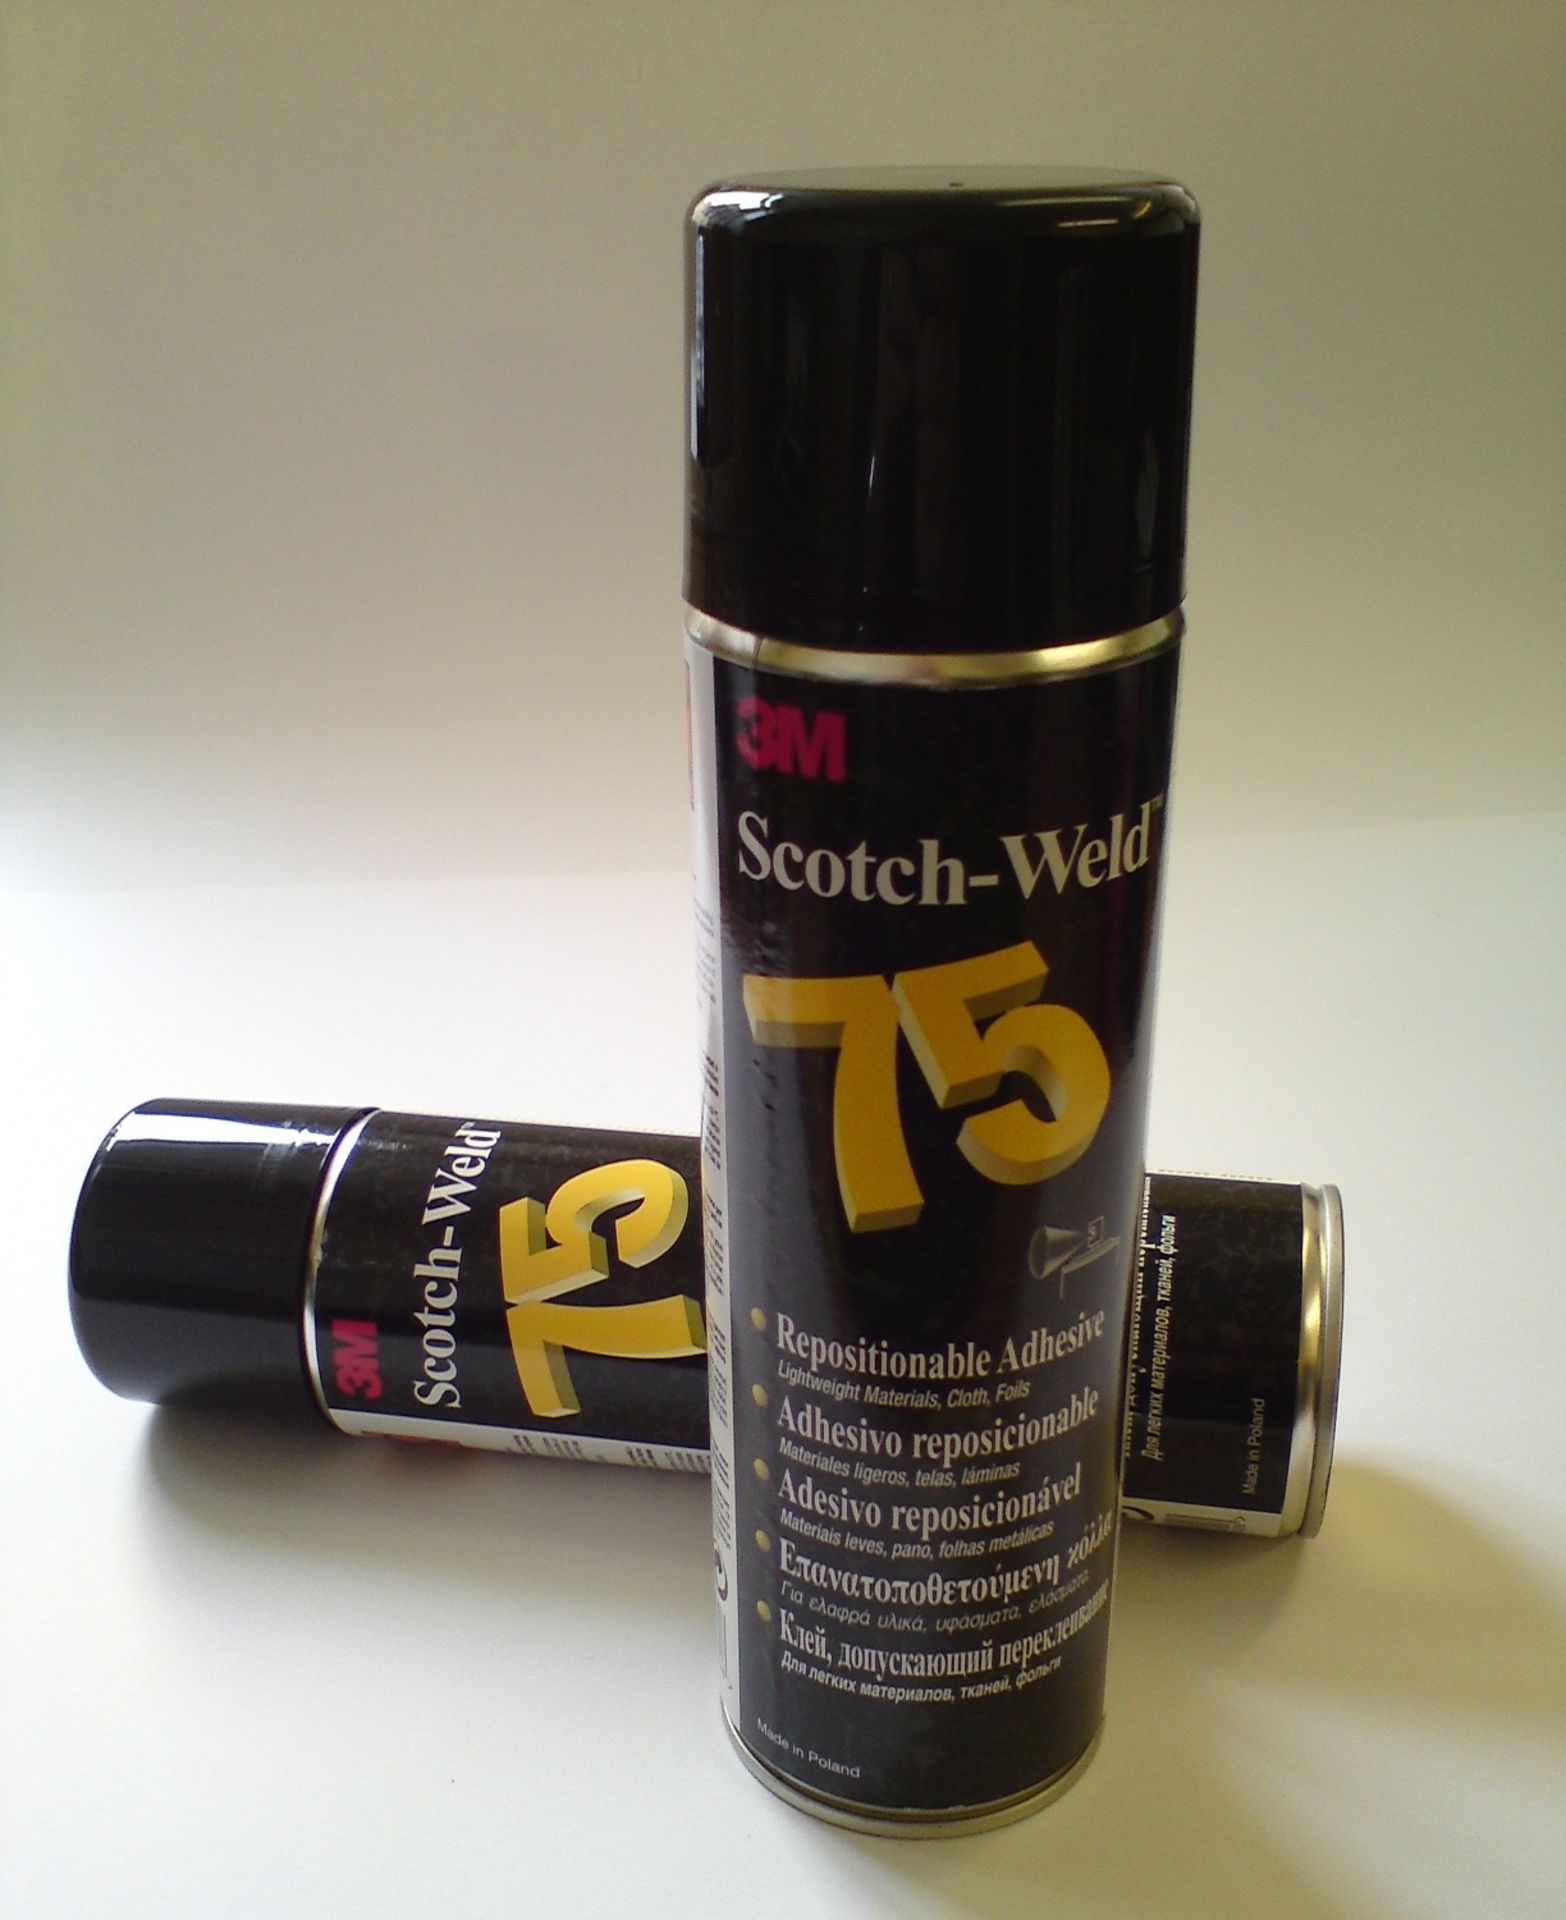 2 x 3M Scotch Weld 75 Repositional Adhesive - For Light Weight Materials, Cloth and Foils -